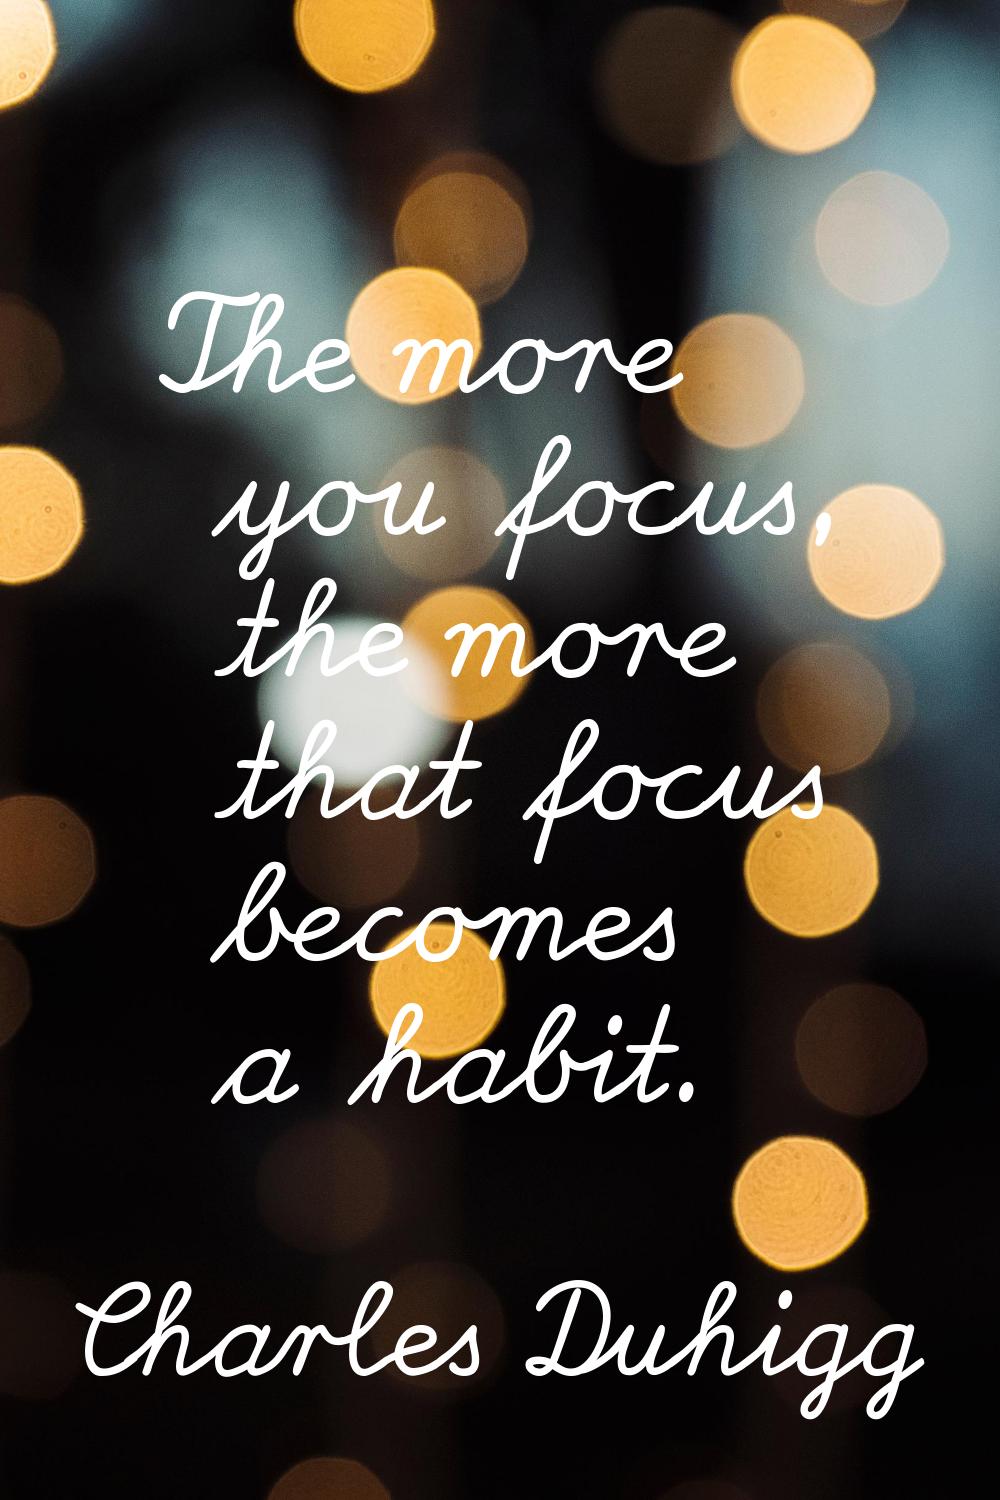 The more you focus, the more that focus becomes a habit.